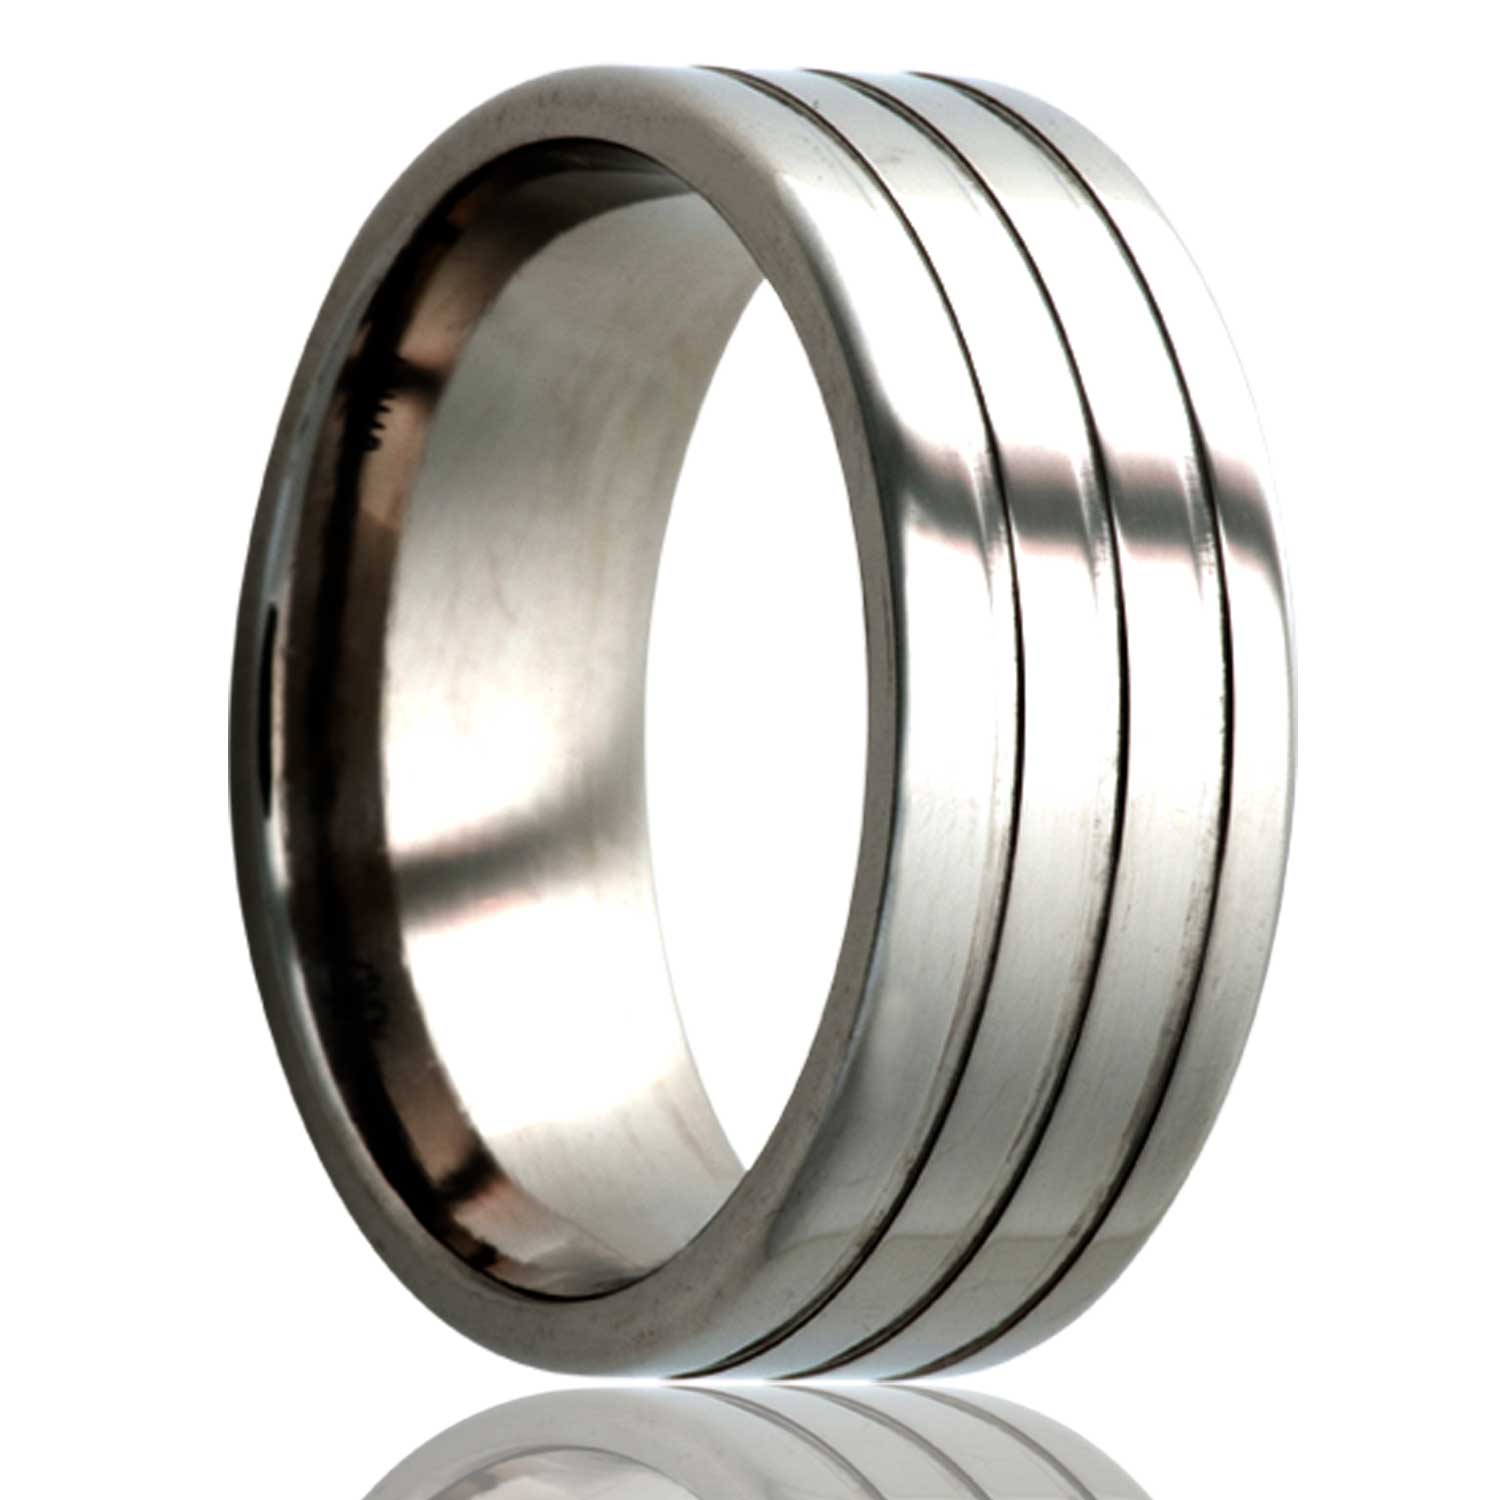 A triple grooved titanium wedding band displayed on a neutral white background.